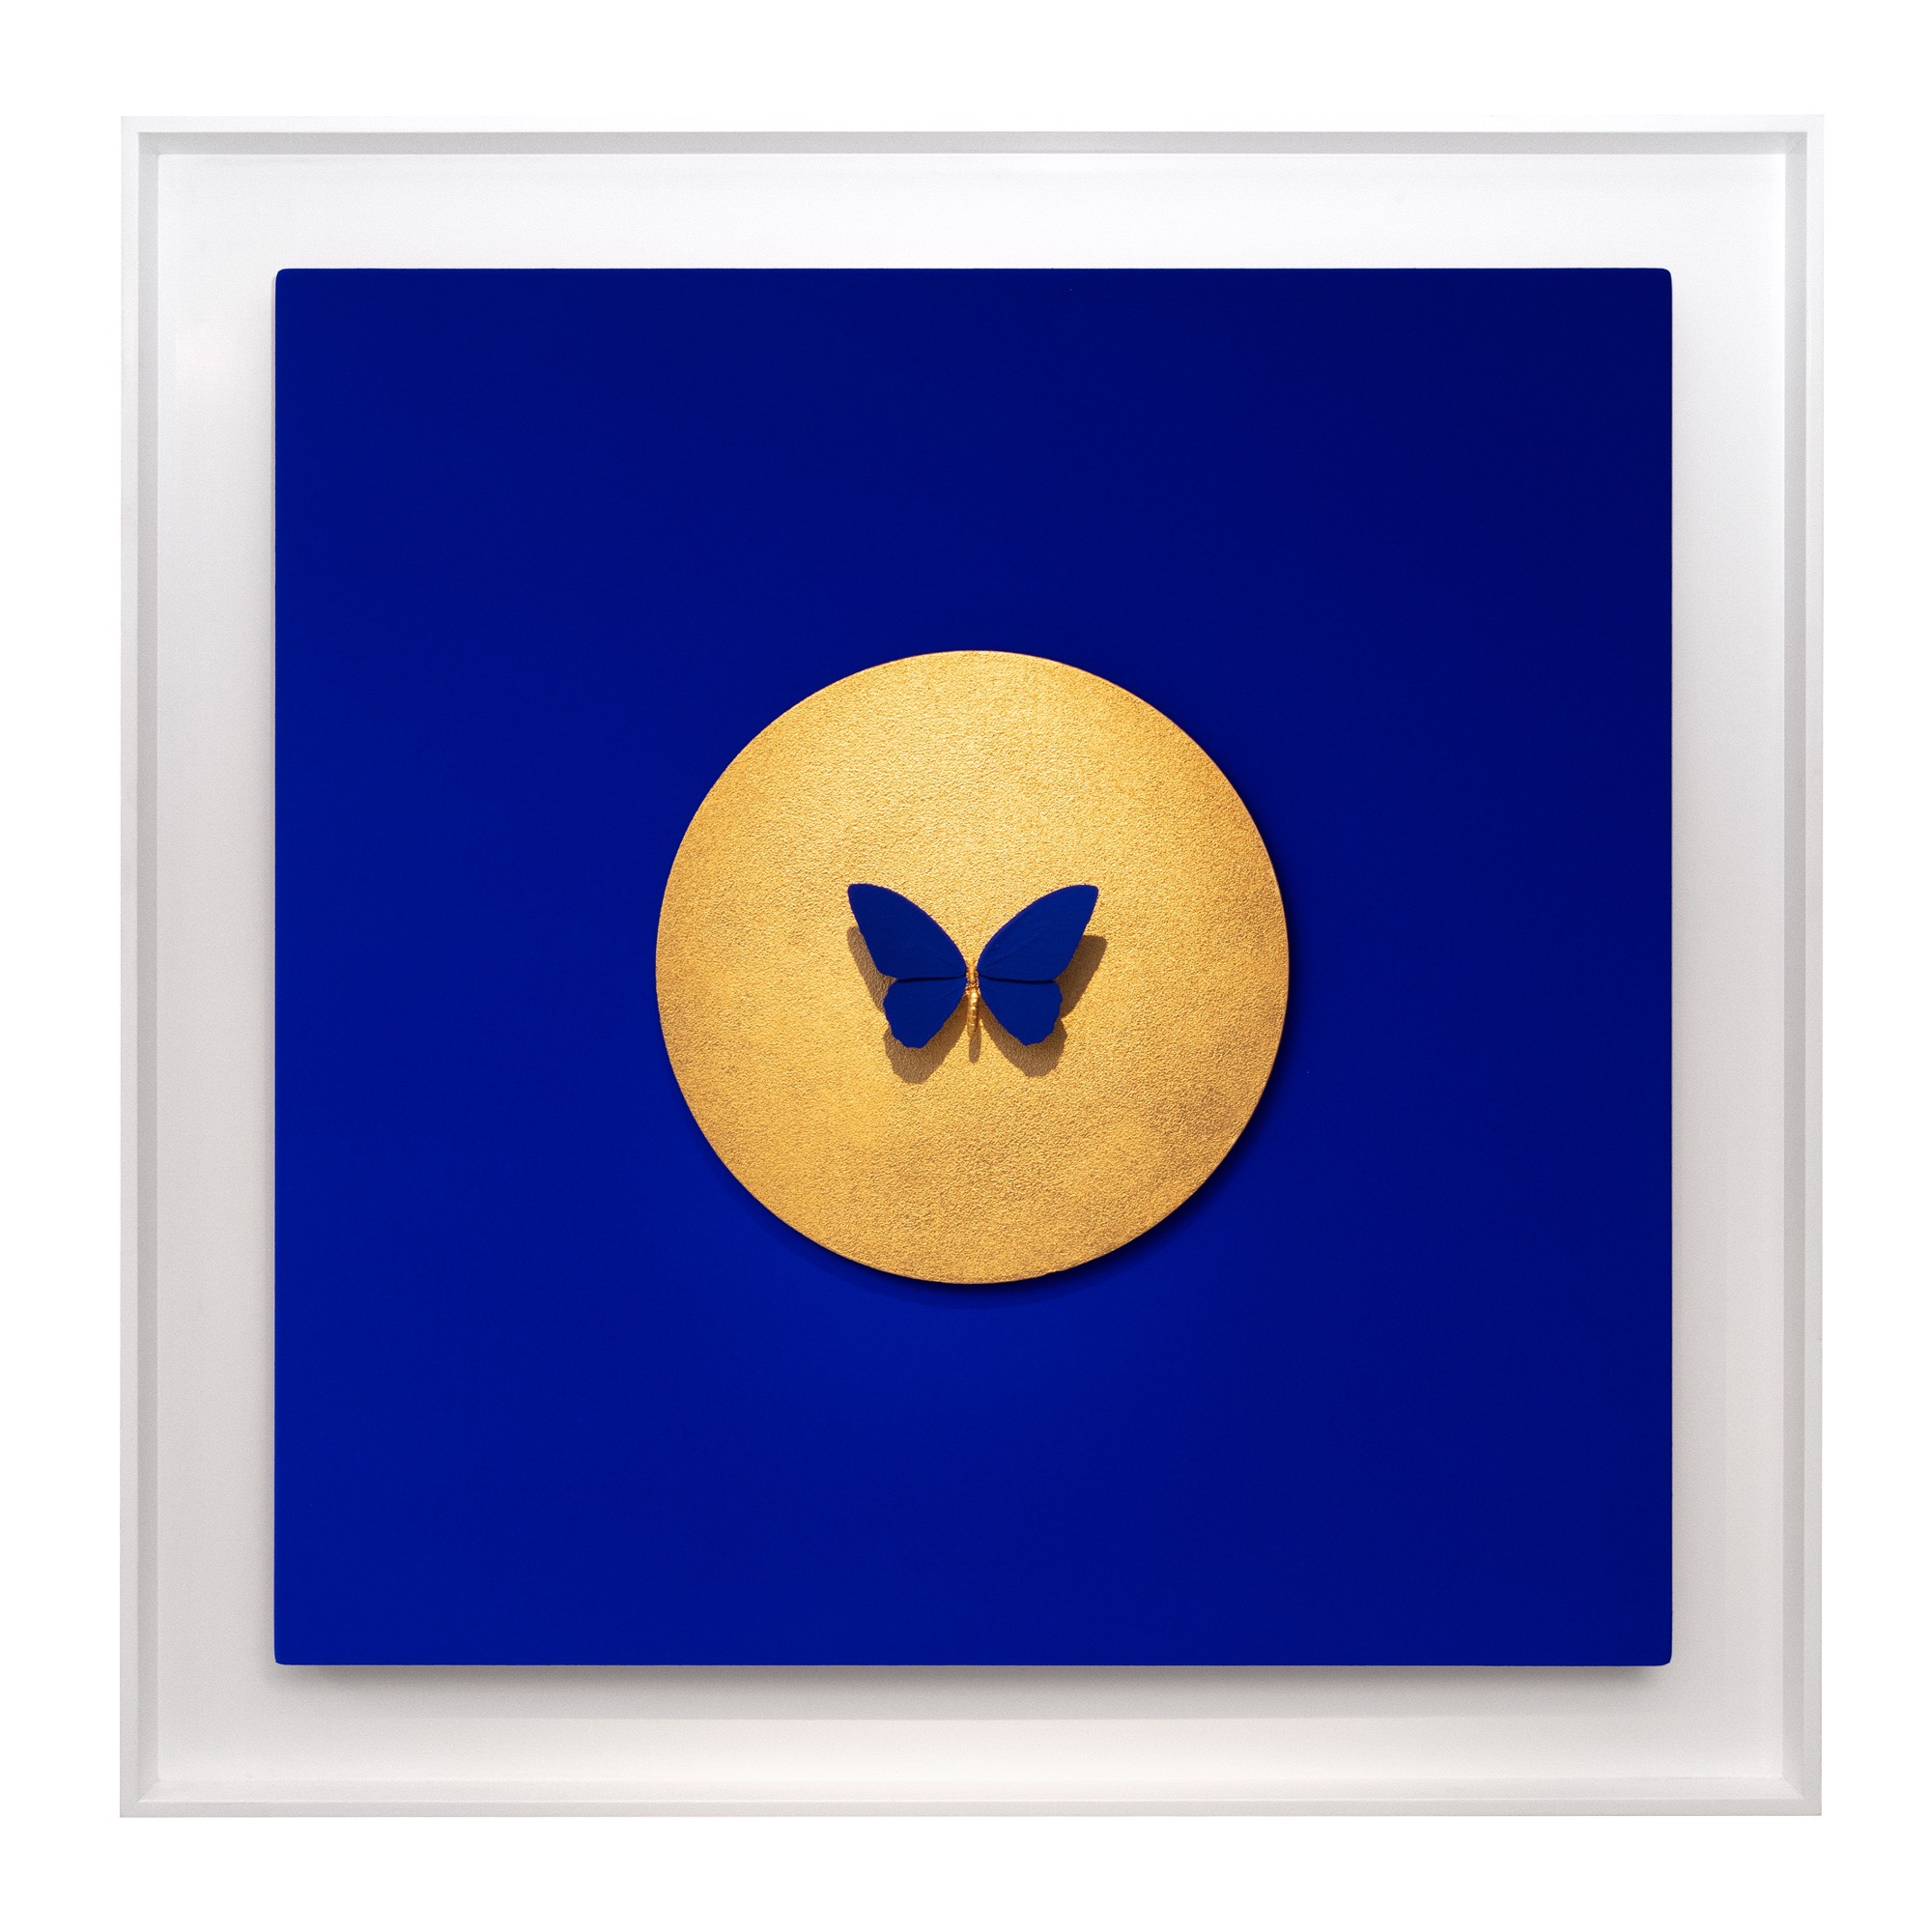 Inversion Gold on Blue III